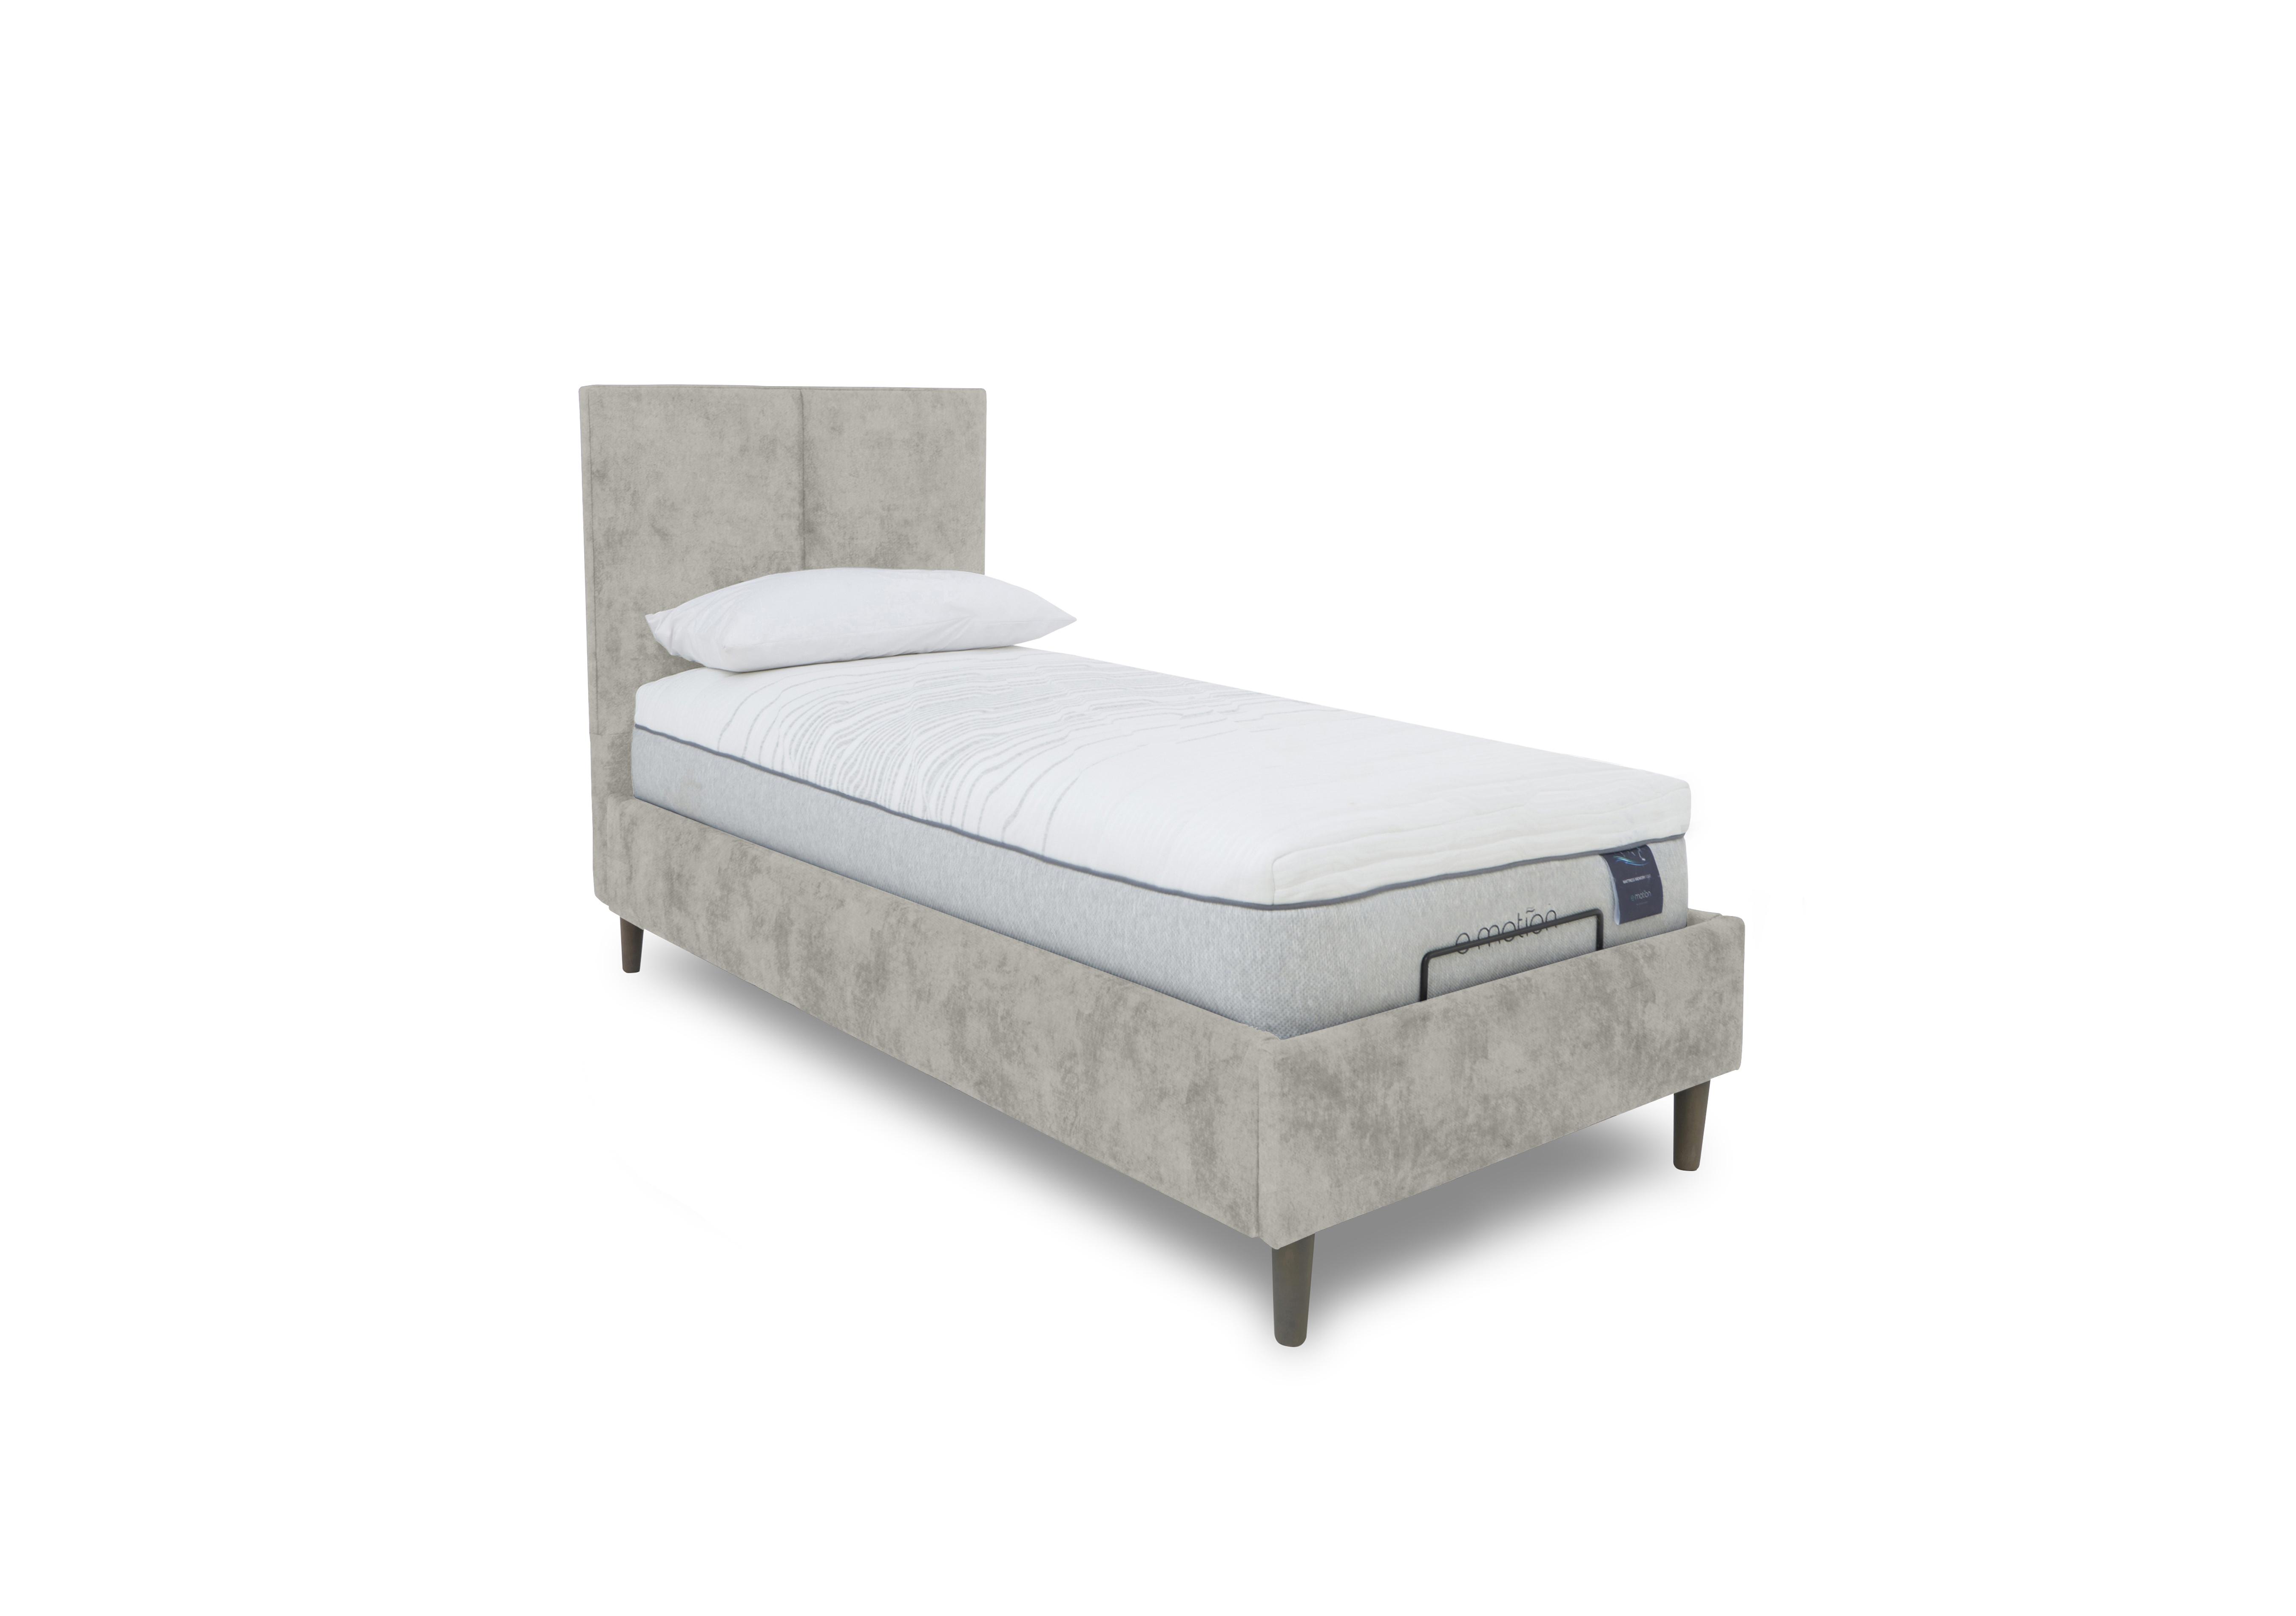 E-Motion Aiko Dual Adjustable Bed Frame with Massage Function in Daytona Stone on Furniture Village